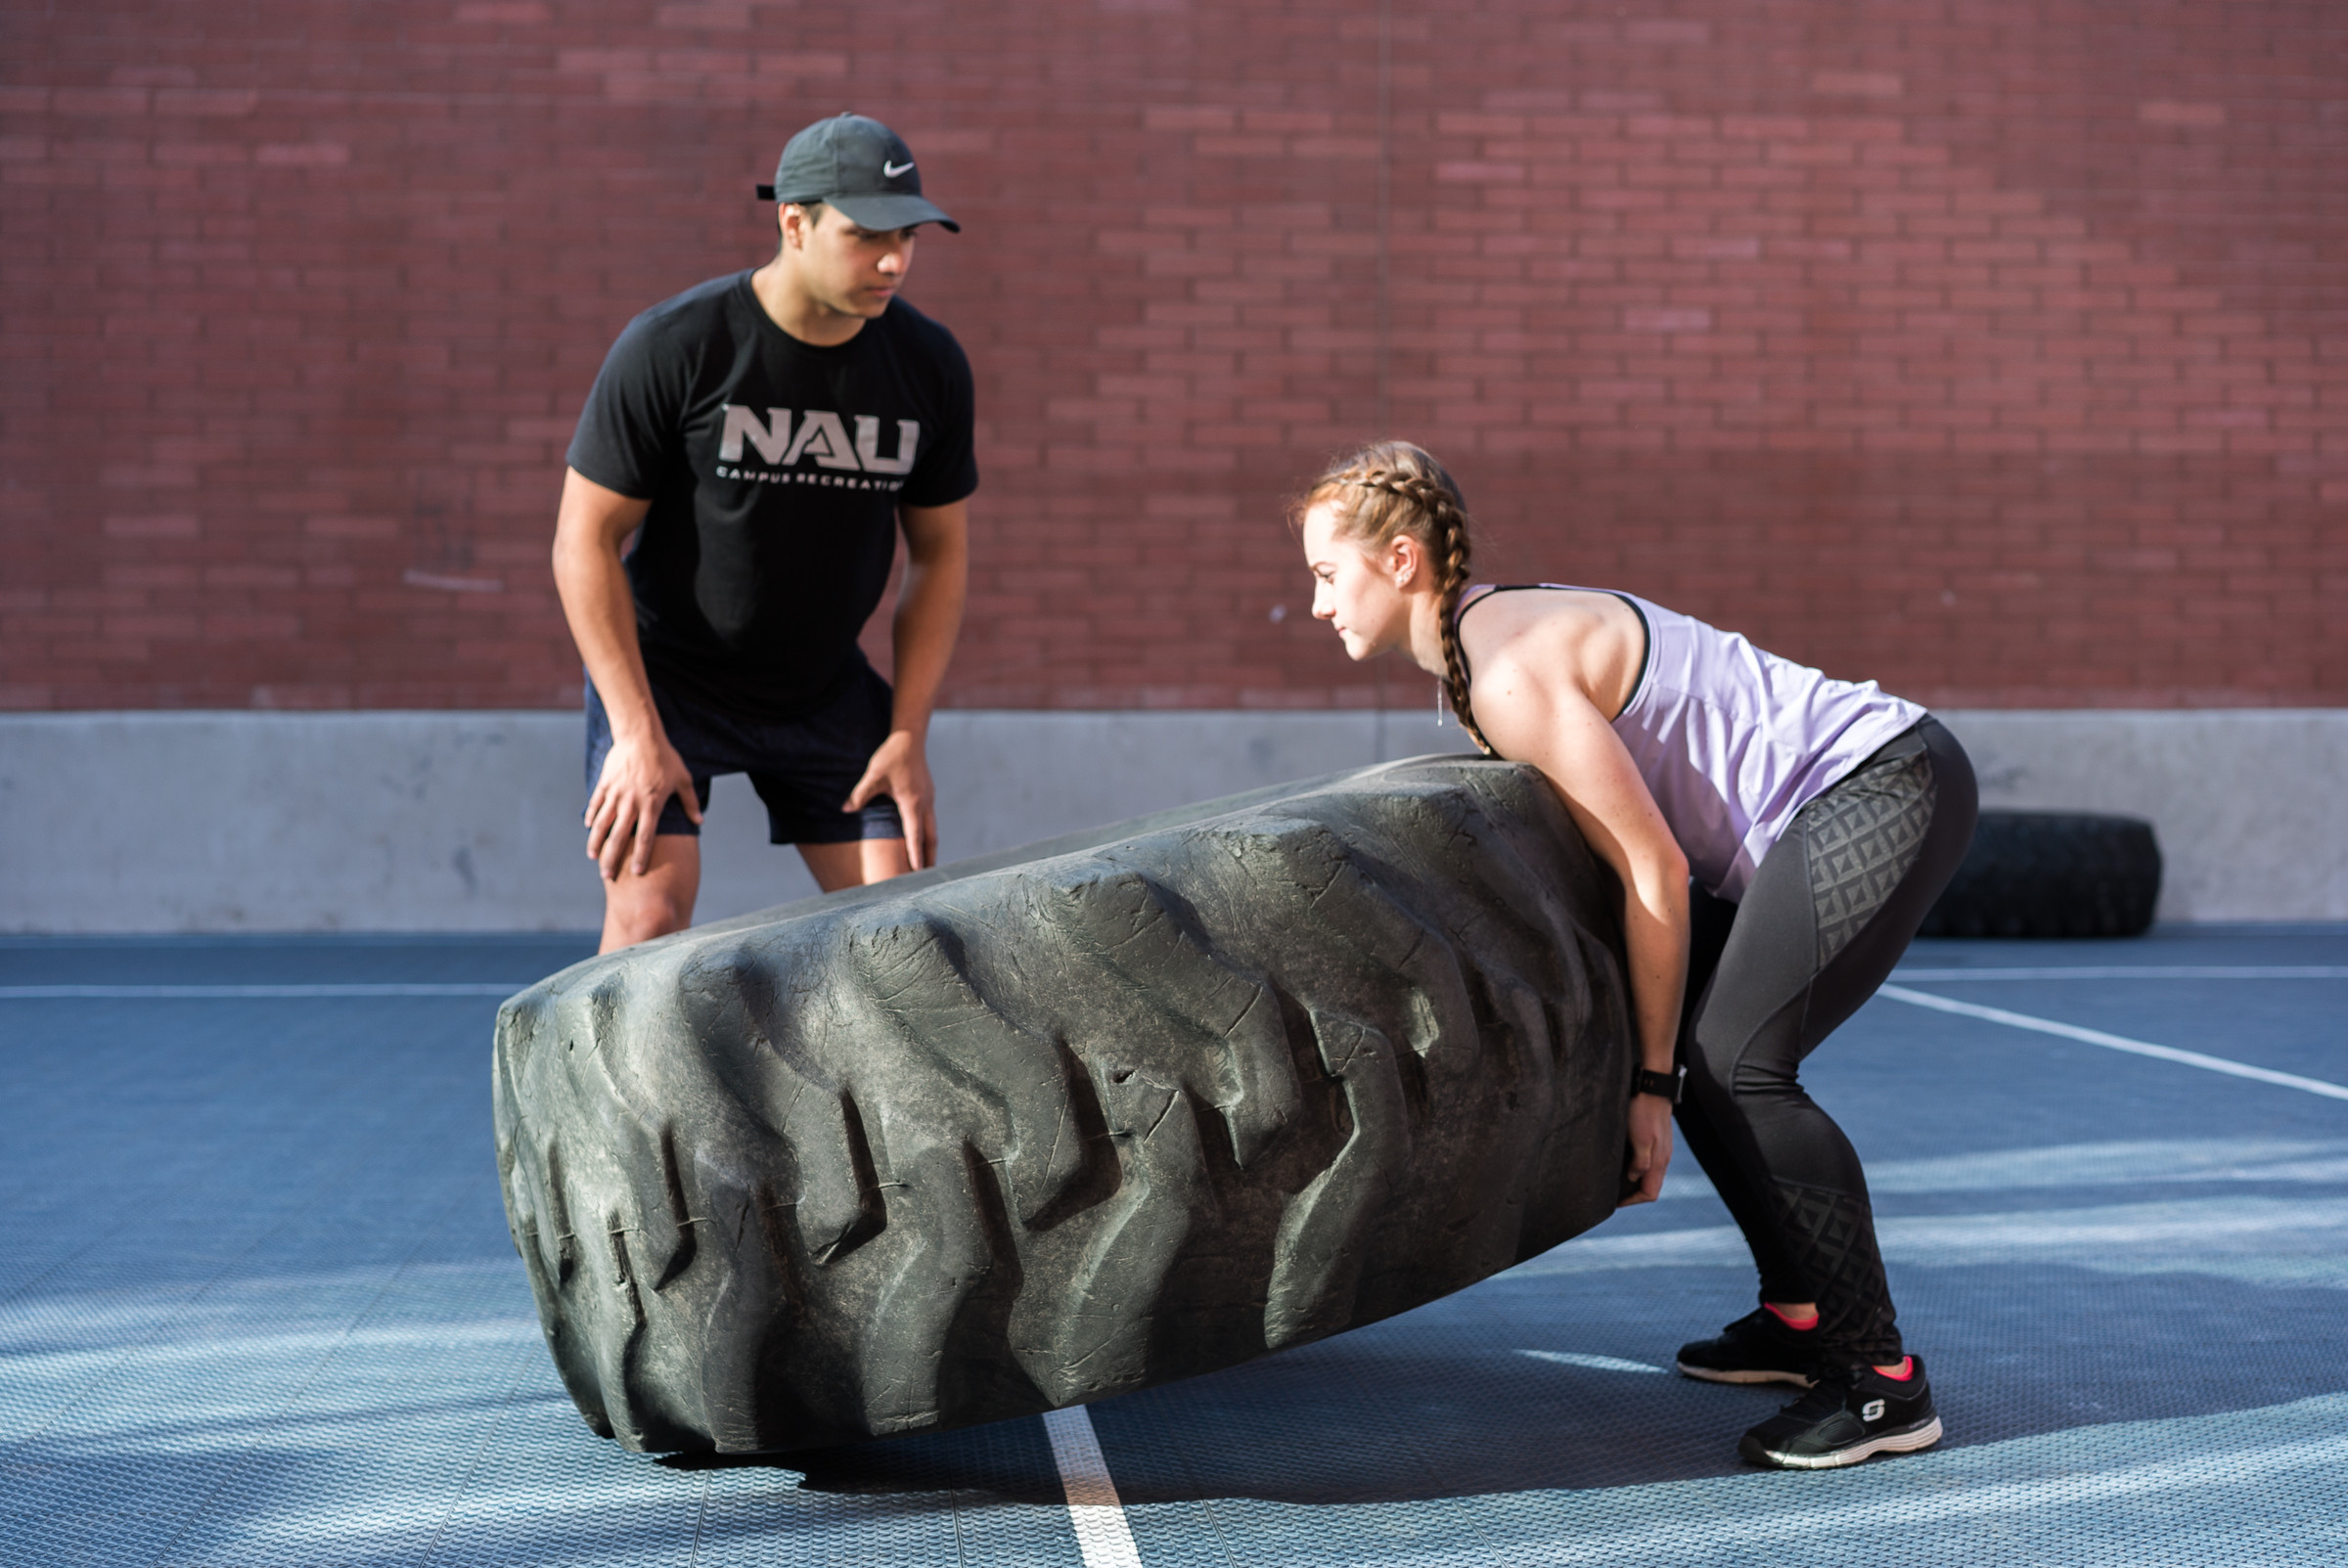 N A U student is lifting a large tire while personal trainer is watching.